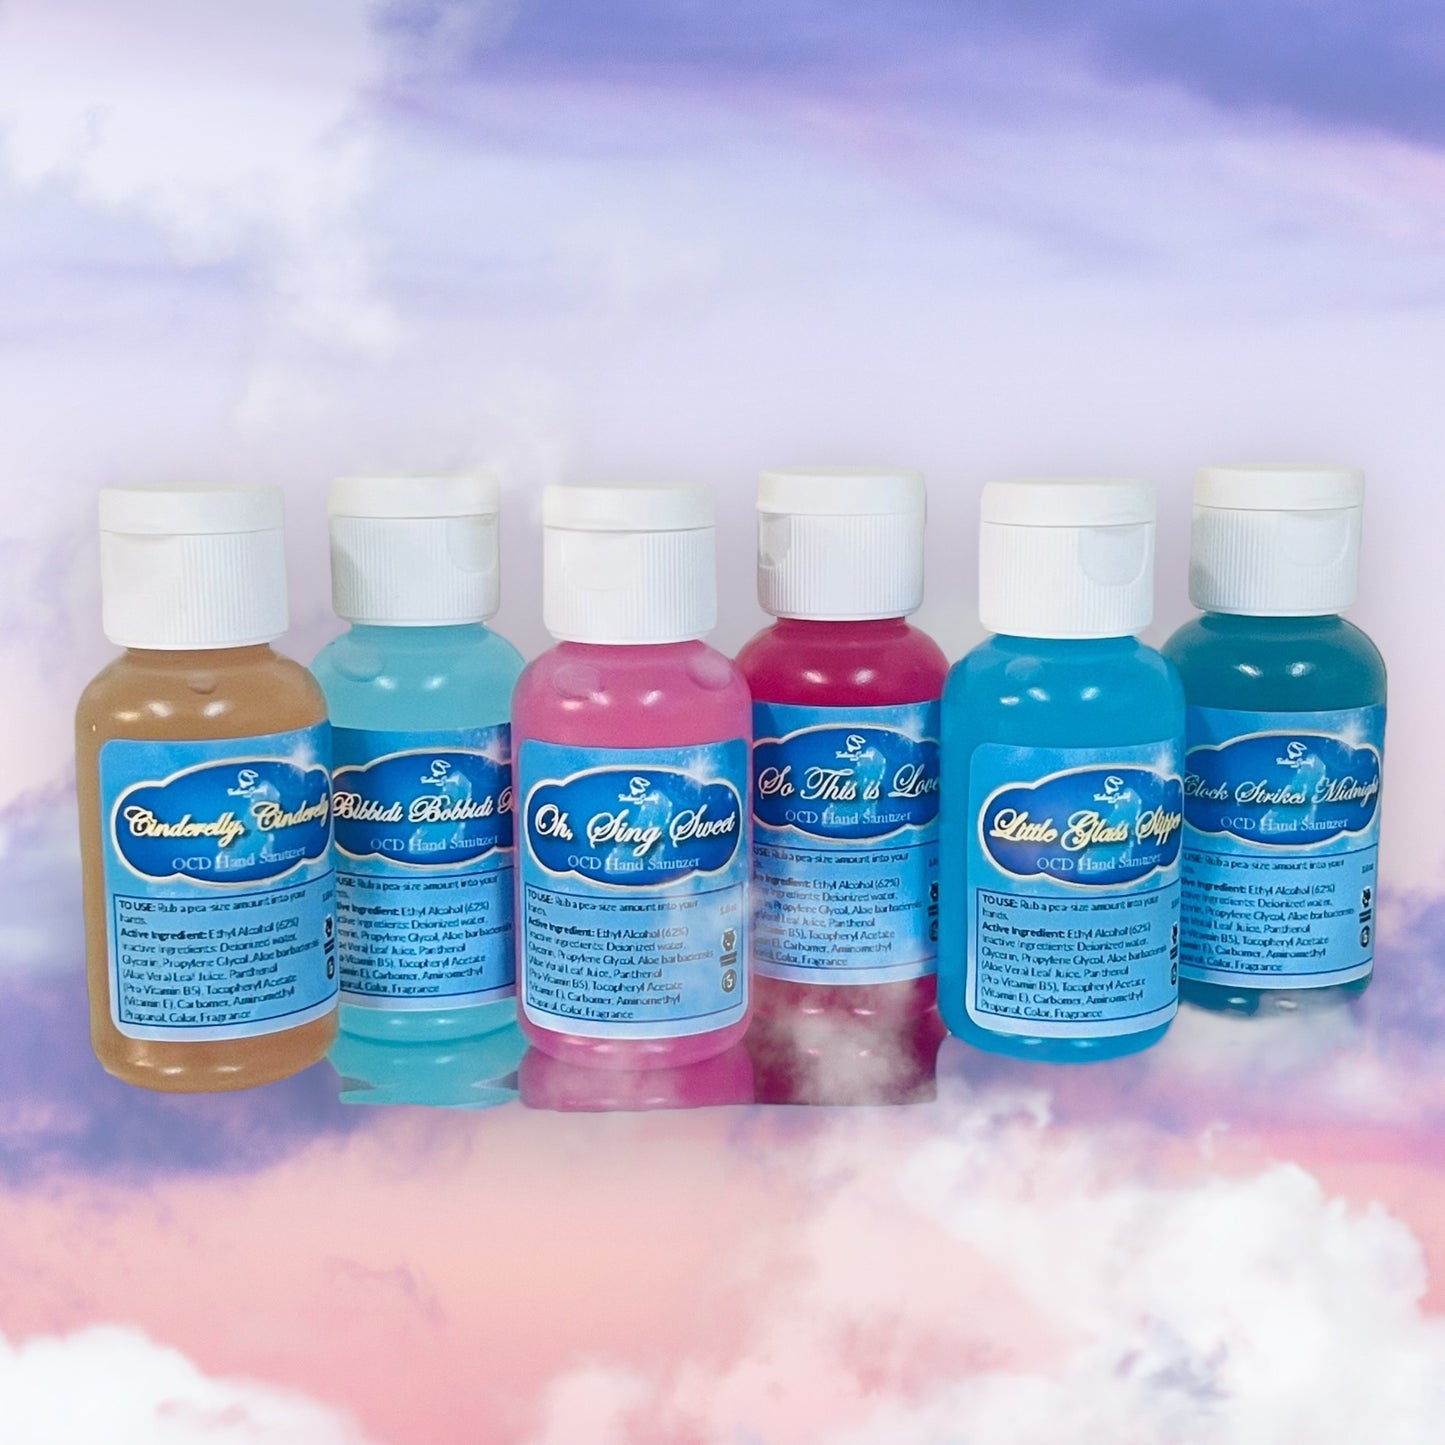 THE DREAMS THAT YOU WISH OCD Hand Sanitizer Sampler